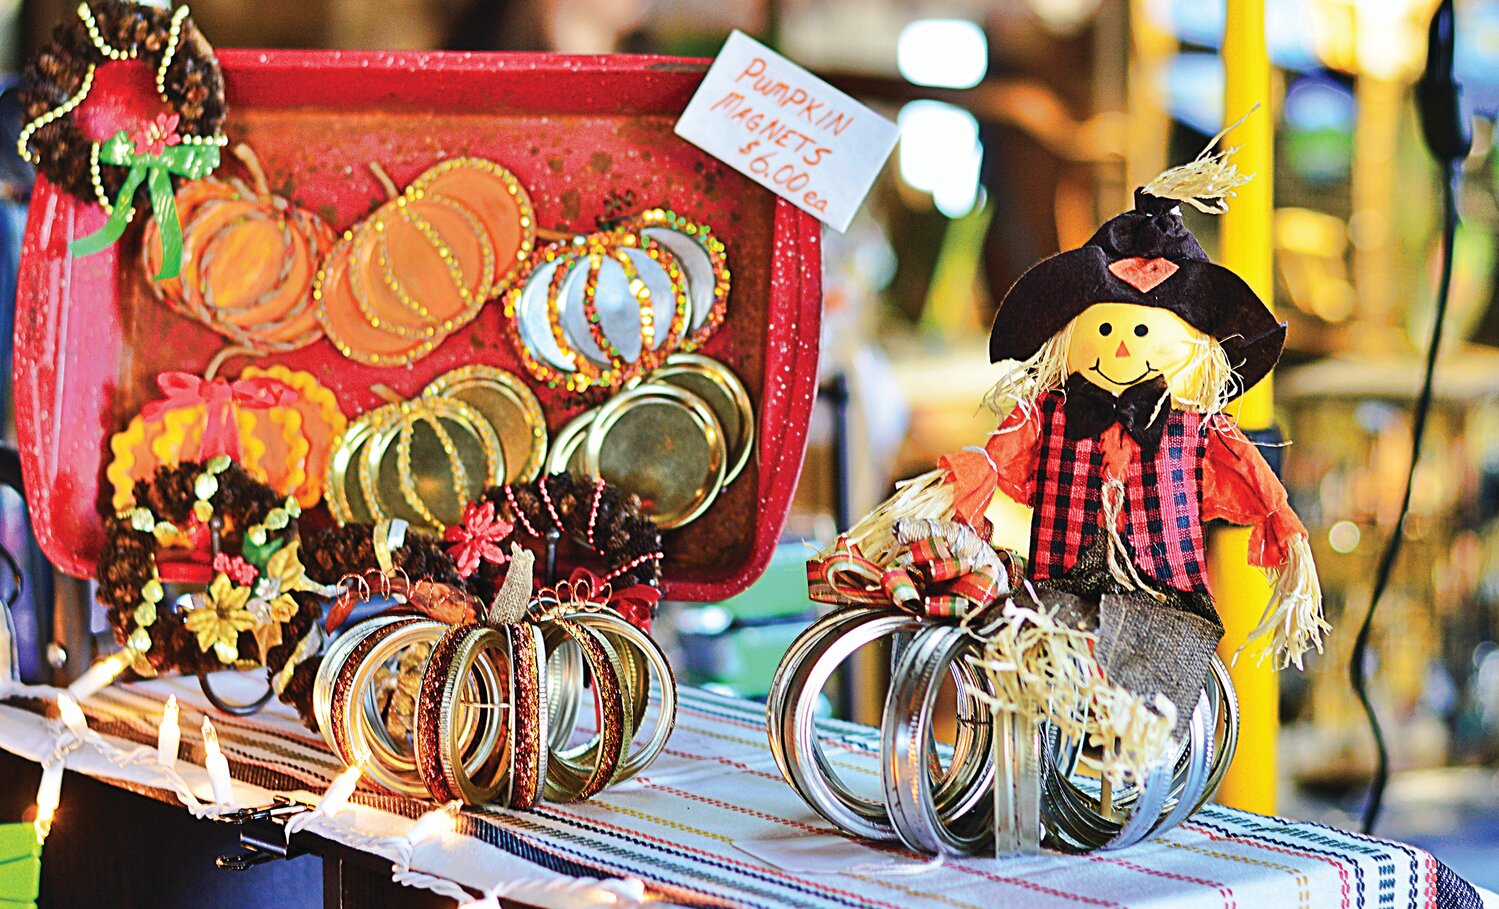 Fall-themed products line the shelves.